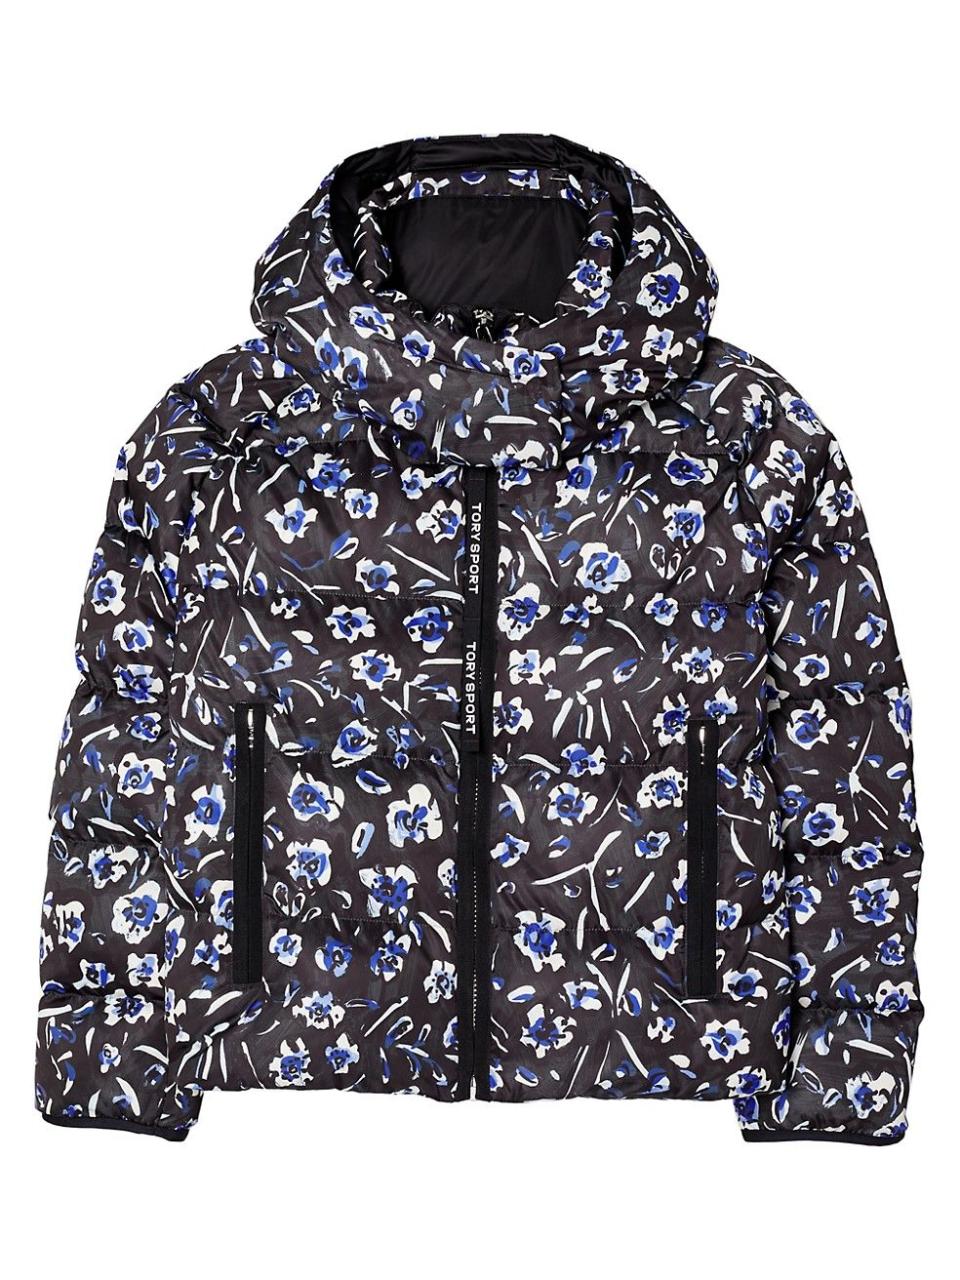 <p><strong>Tory Burch</strong></p><p>saksfifthavenue.com</p><p><strong>$458.00</strong></p><p>Florals for winter? Groundbreaking. Particularly when paired with this cozy (and reversible!) puffer jacket. </p>